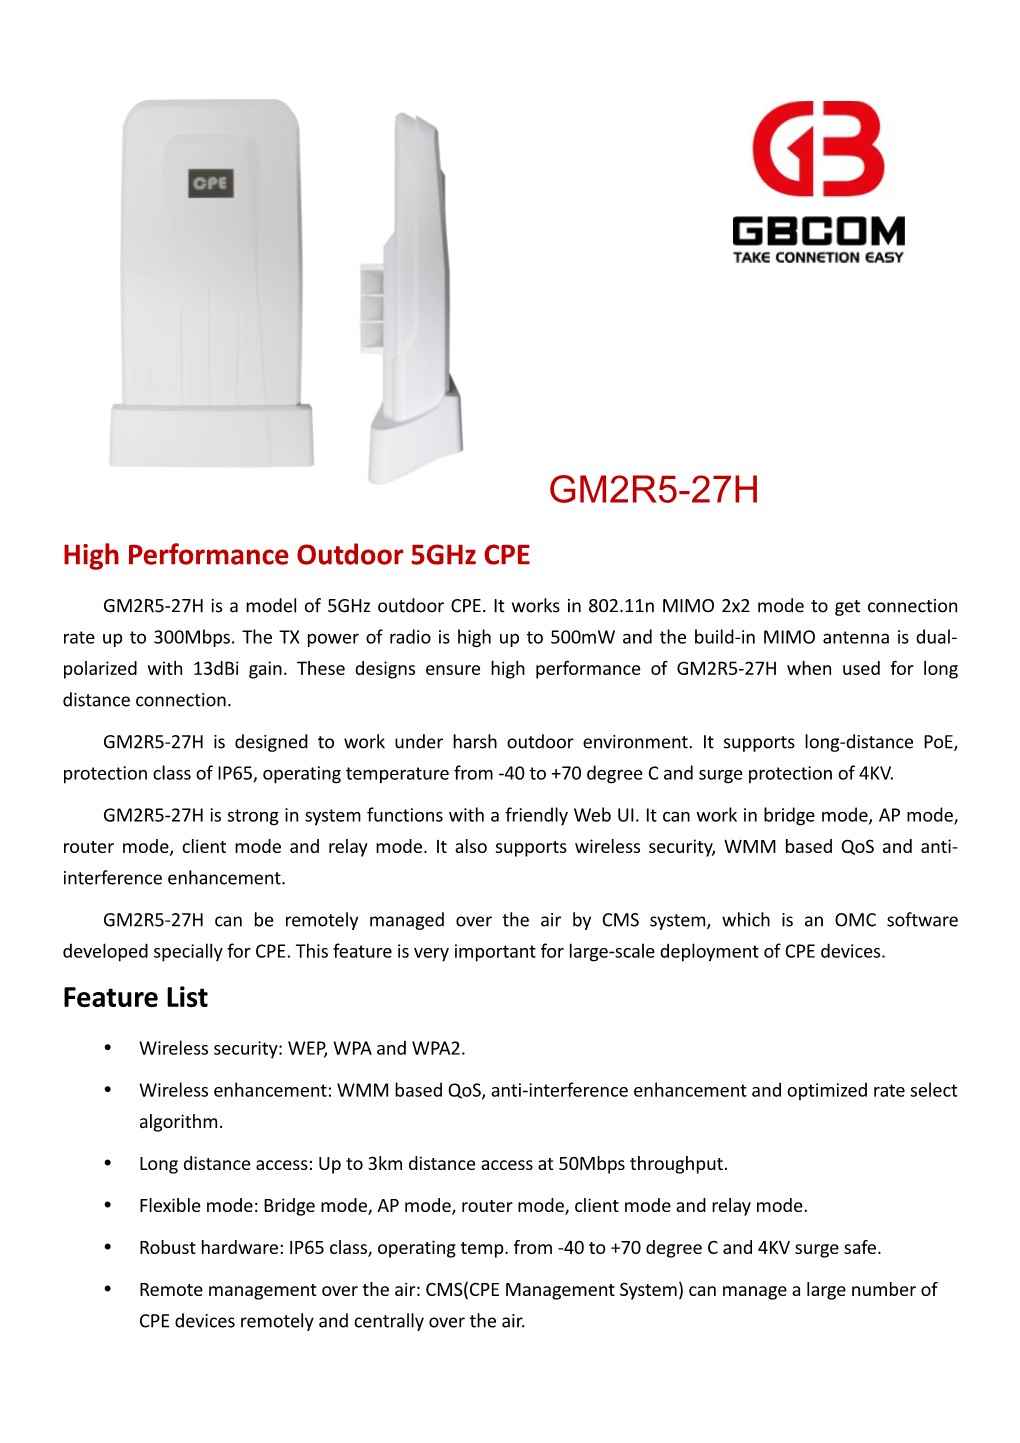 High Performance Outdoor5ghz CPE